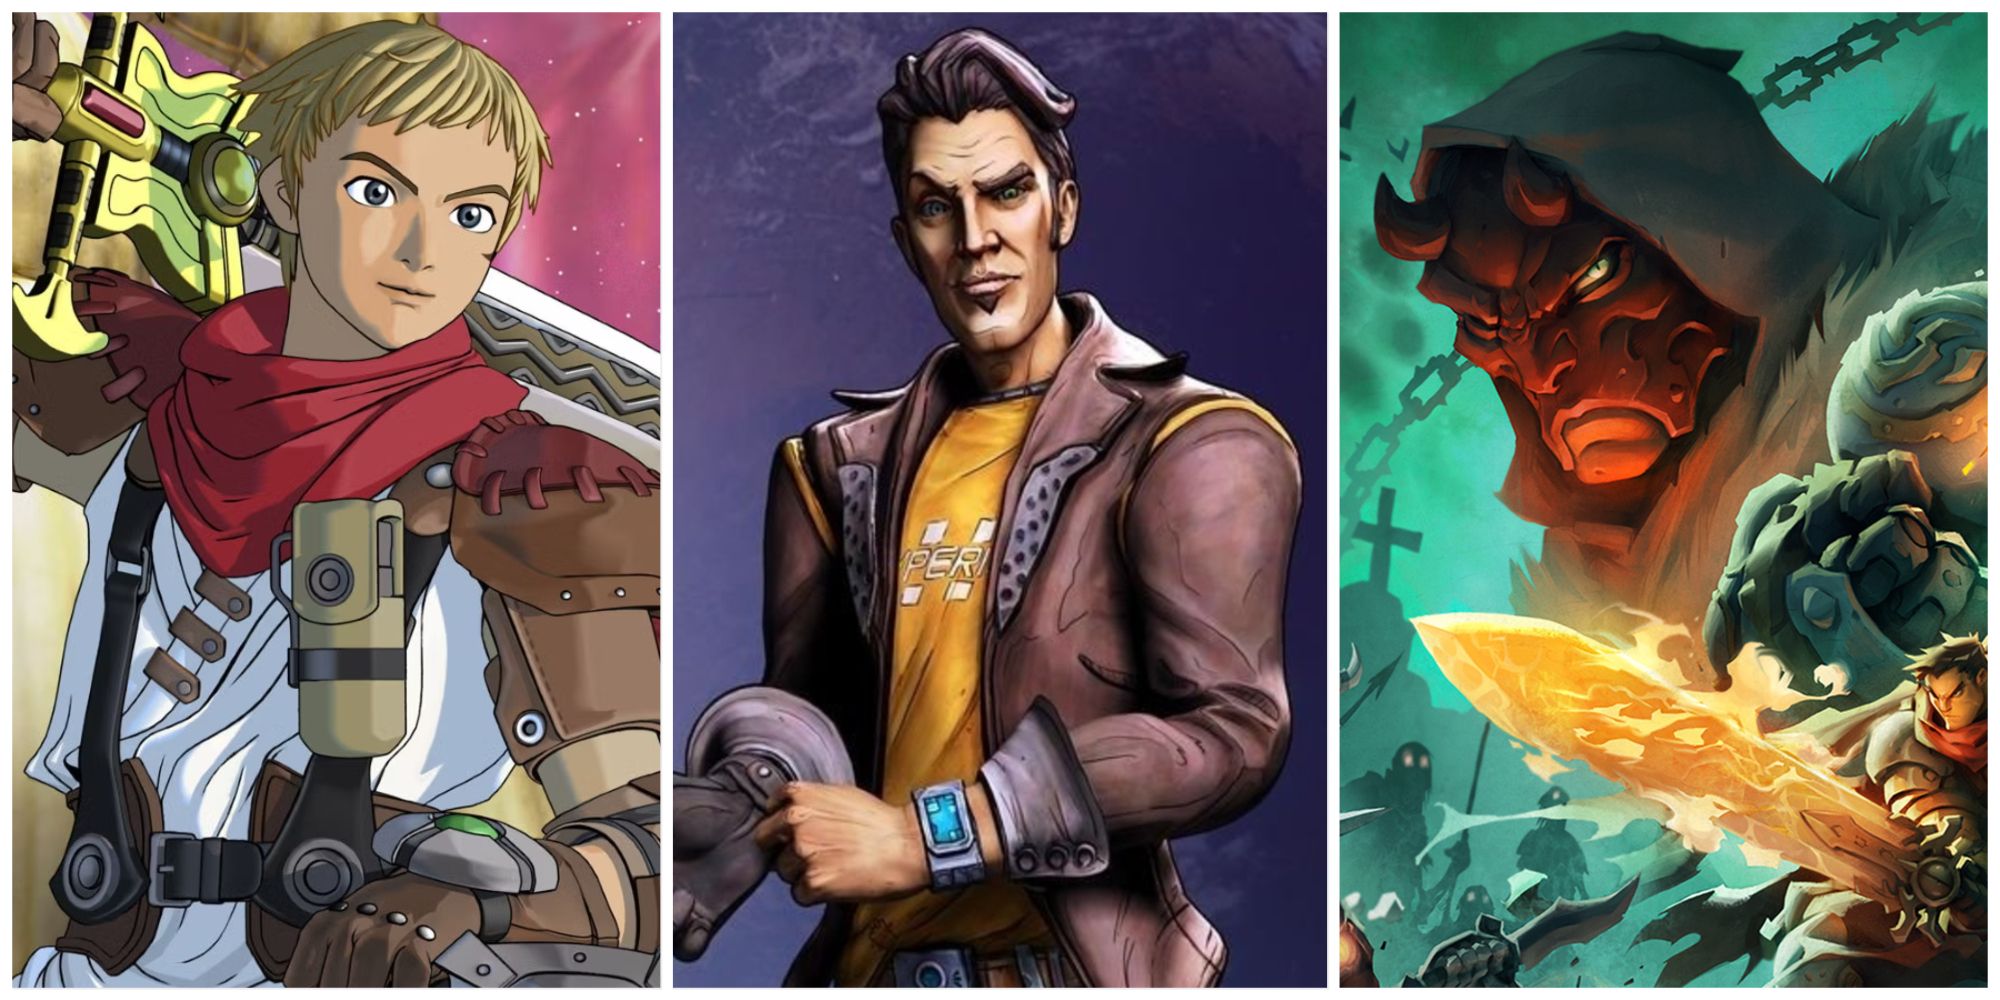 Characters from Rogue Galaxy, Borderlands, and Battle Chaseres Nightwar split image 